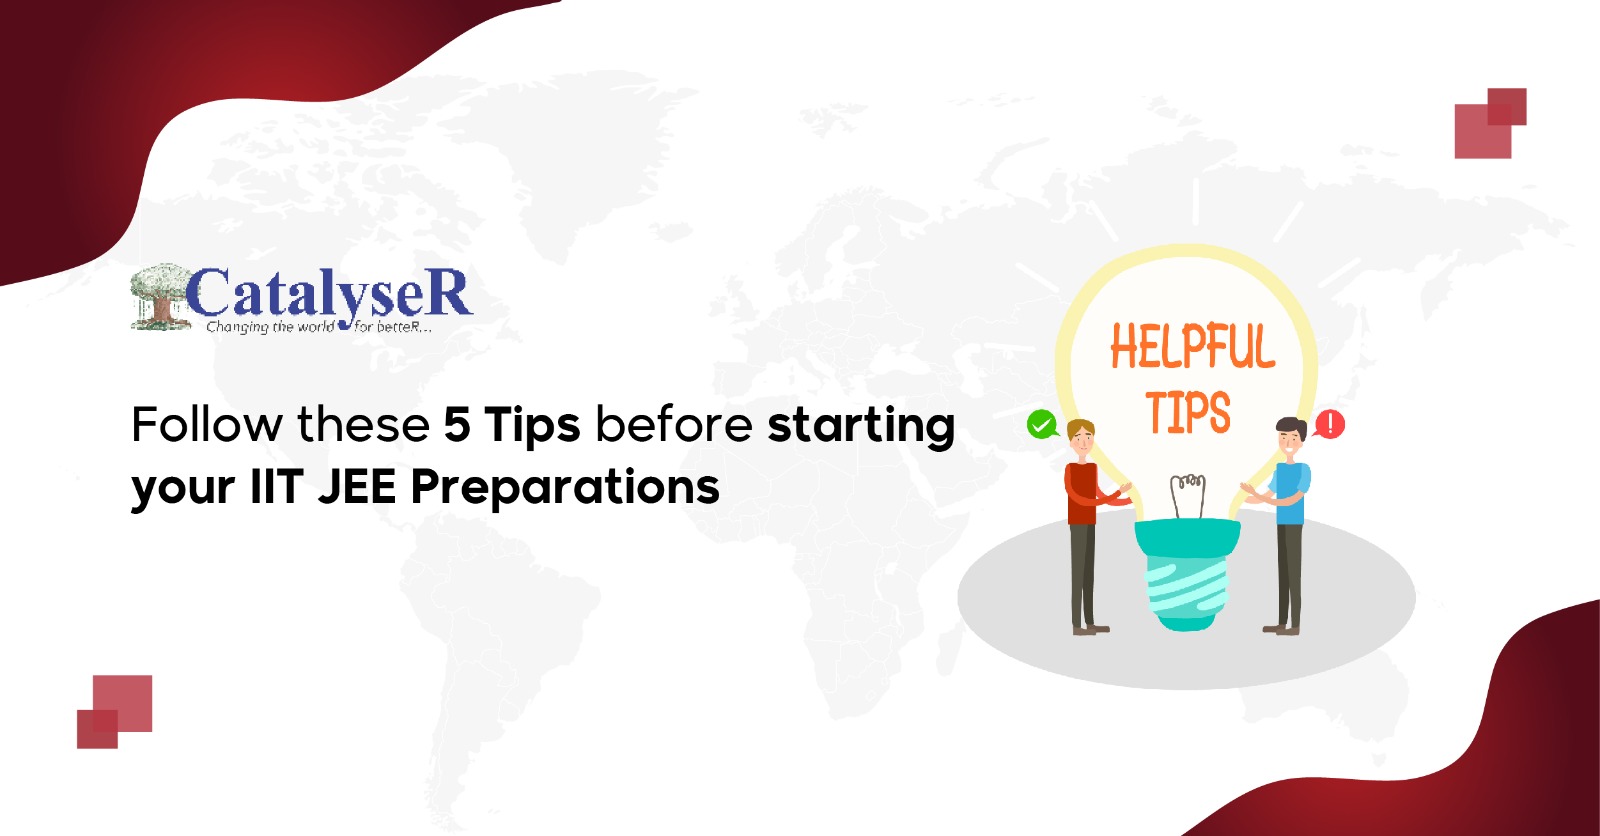 Follow these 5 Tips before starting your IIT JEE Preparations